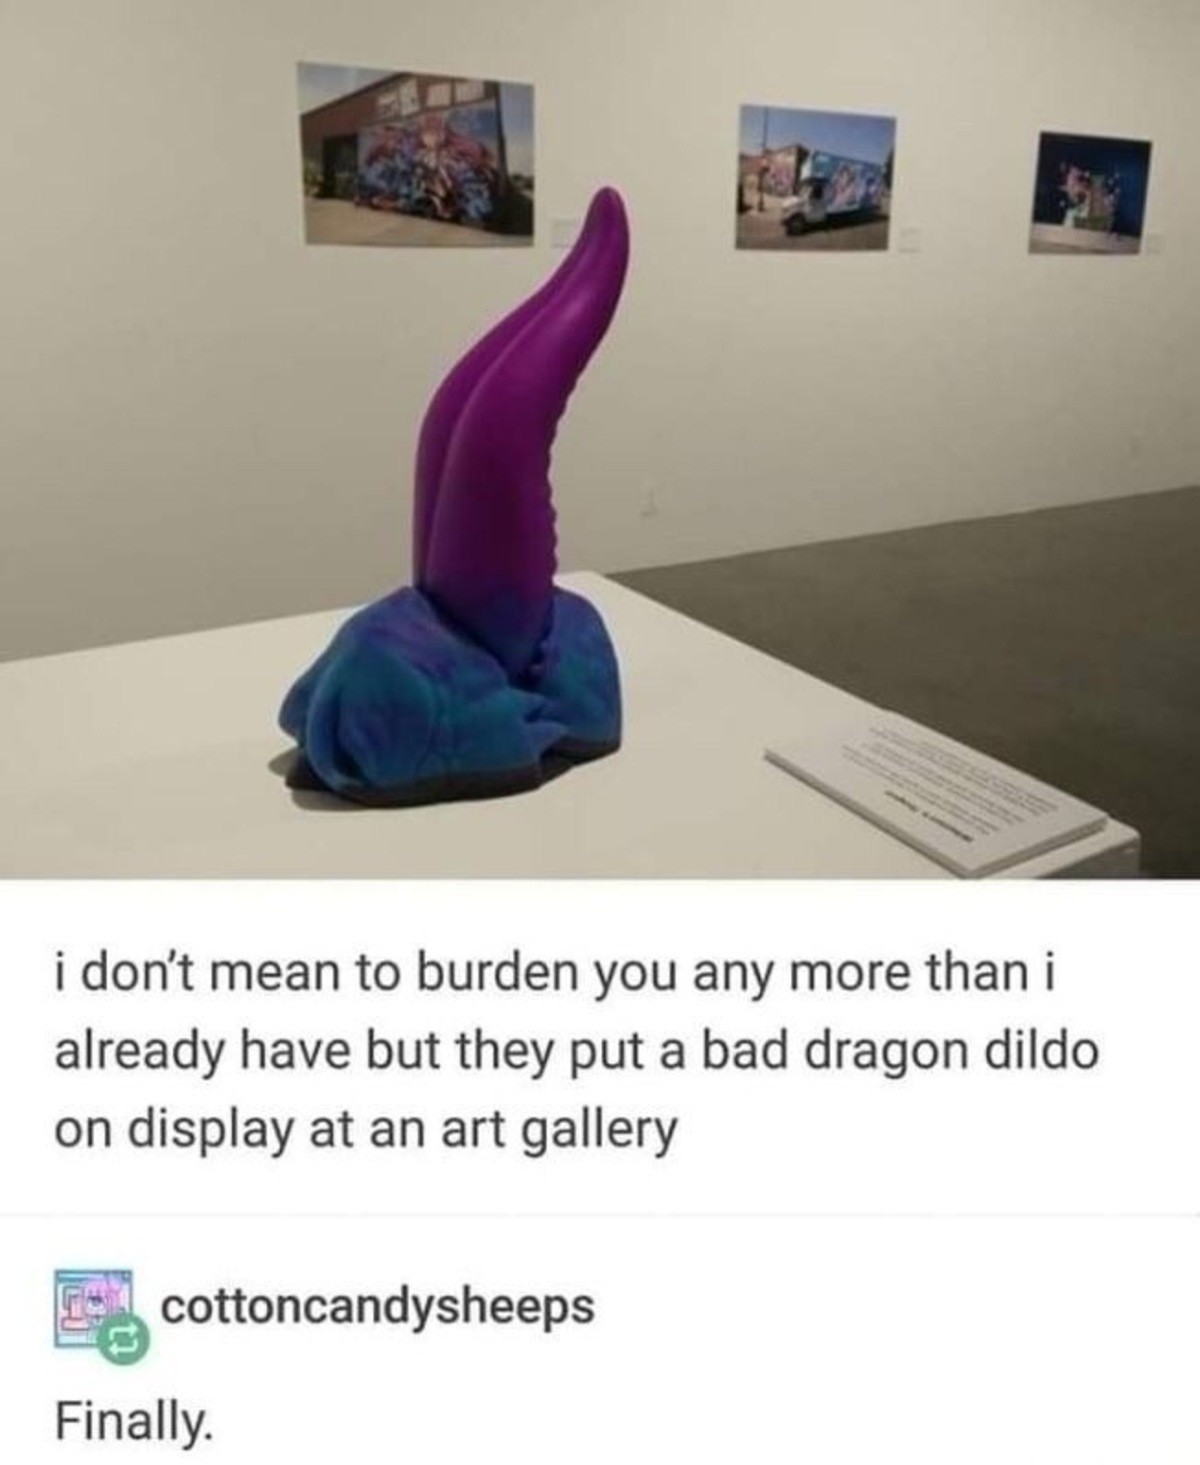 agszhdtf. .. Why does the dragon have a tentacle for a dick?